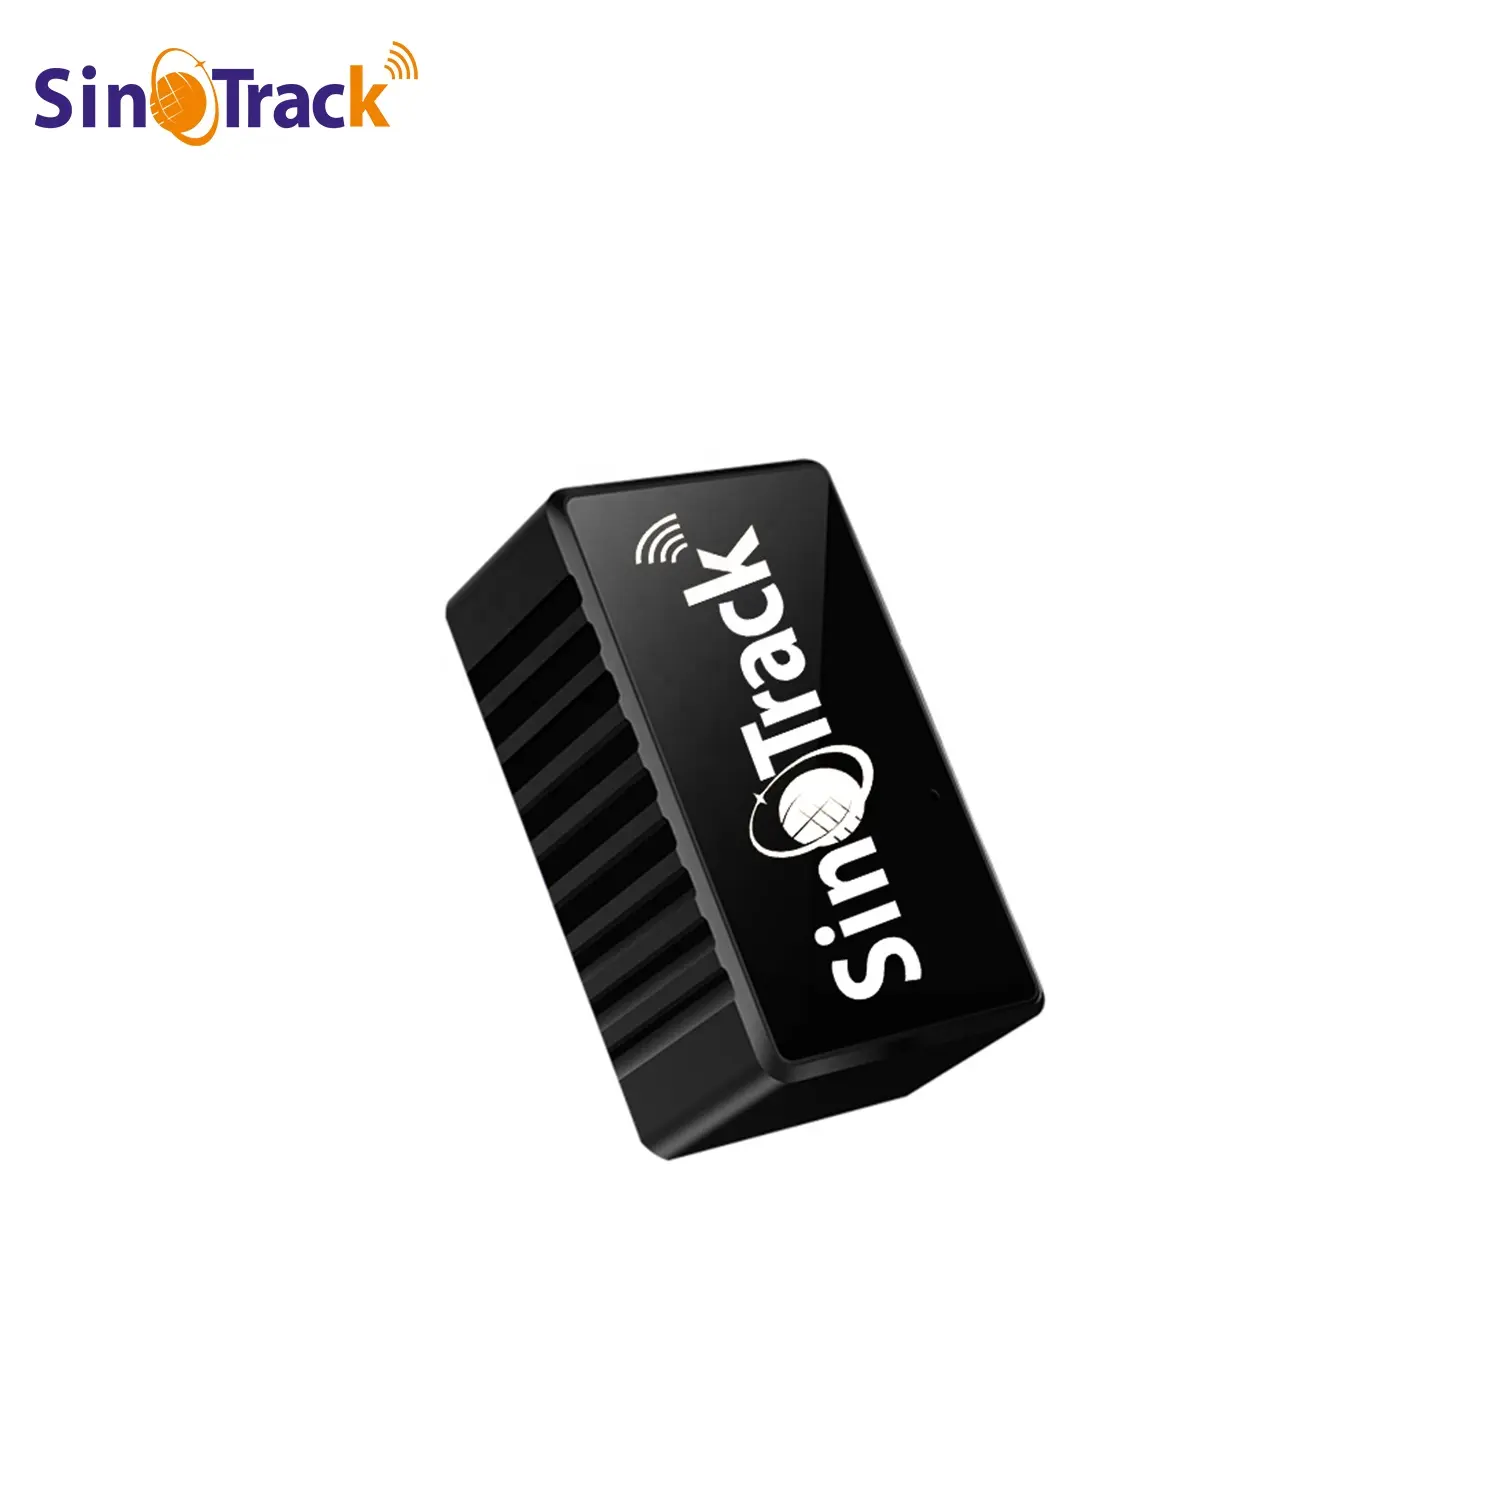 SinoTrack Mini Portable ST-903 Wireless Personal Vehicle GPS Tracking Device With Free App Software